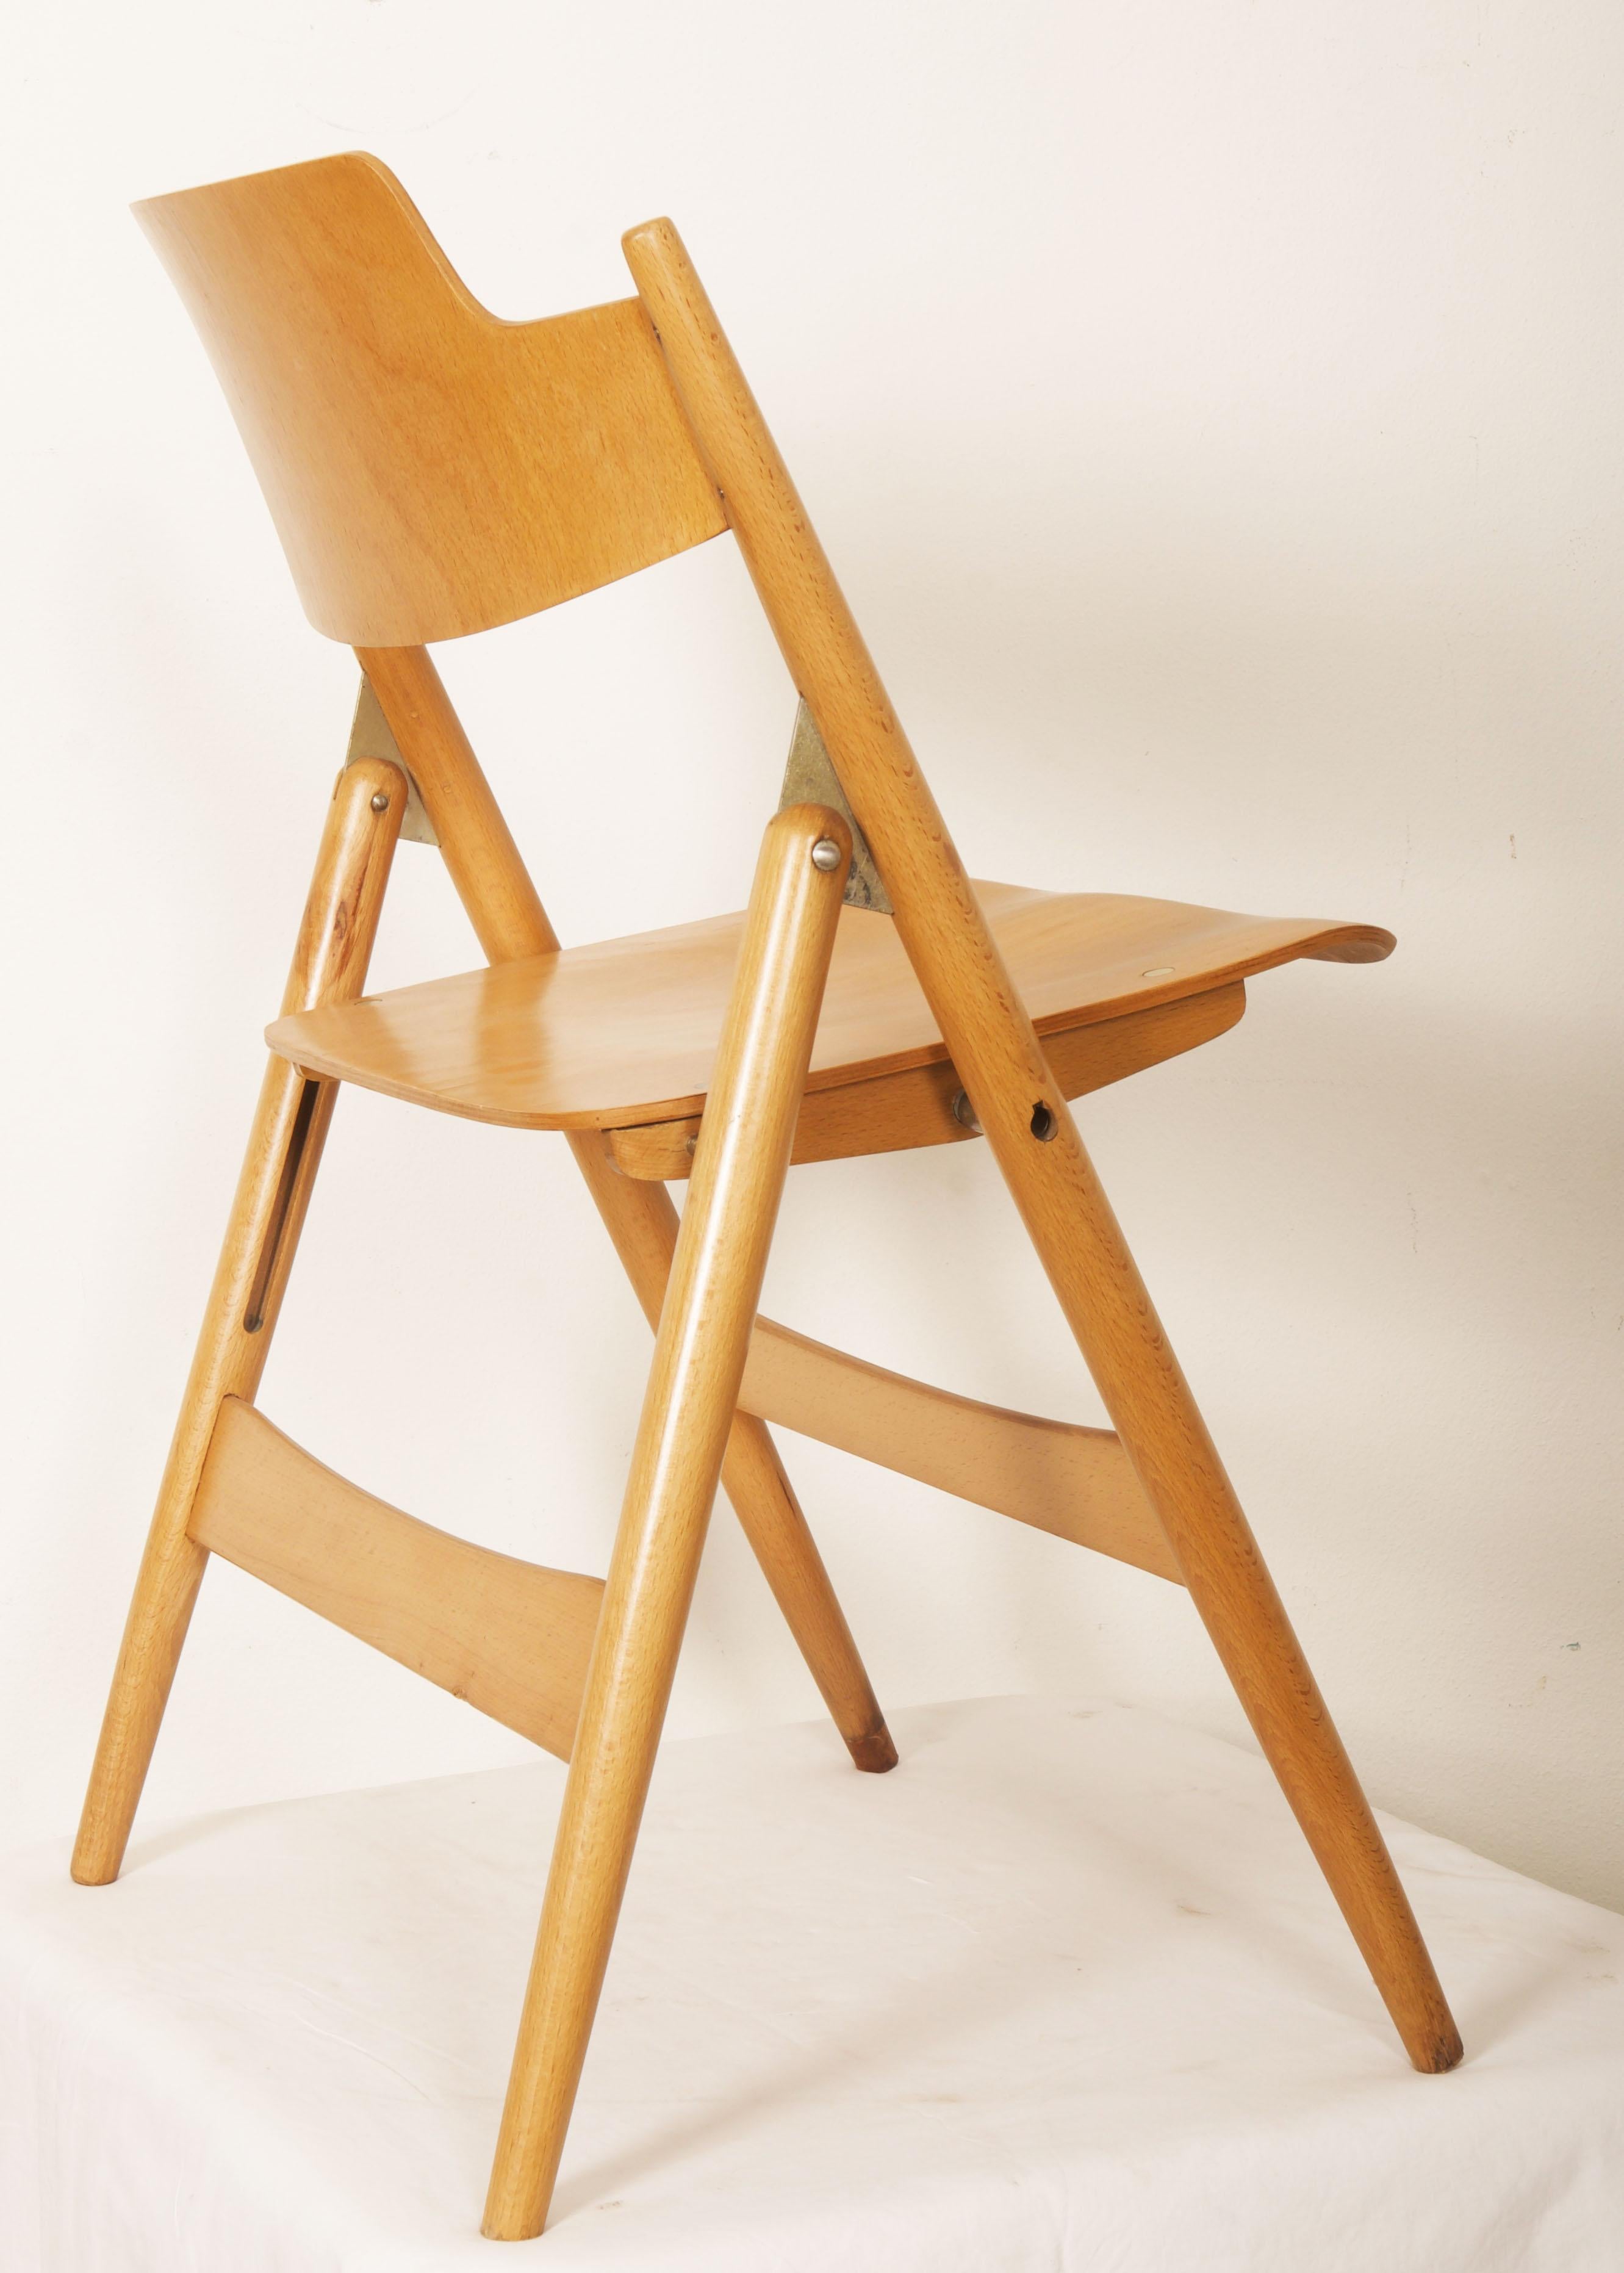 Folding chair model SE18 was designed in 1952 by Egon Eiermann for Wilde & Spieth. Chair is now displays at Museum of Modern Art in New York in their permanent modern art collection and it was shown at the World Exhibition Brussels in 1958. Its